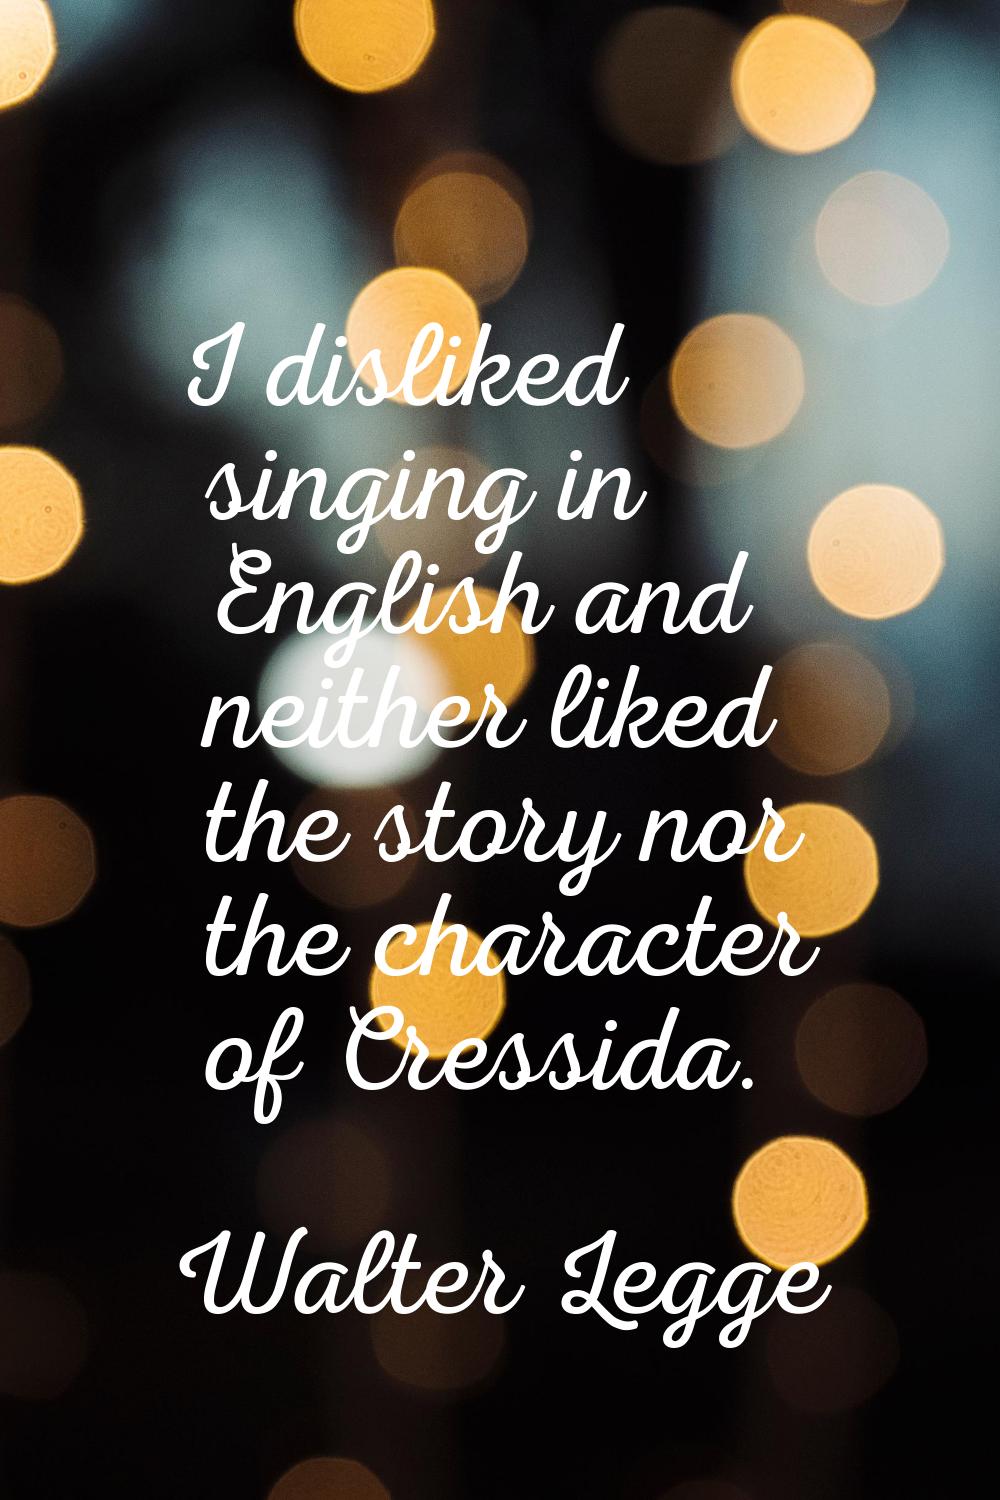 I disliked singing in English and neither liked the story nor the character of Cressida.